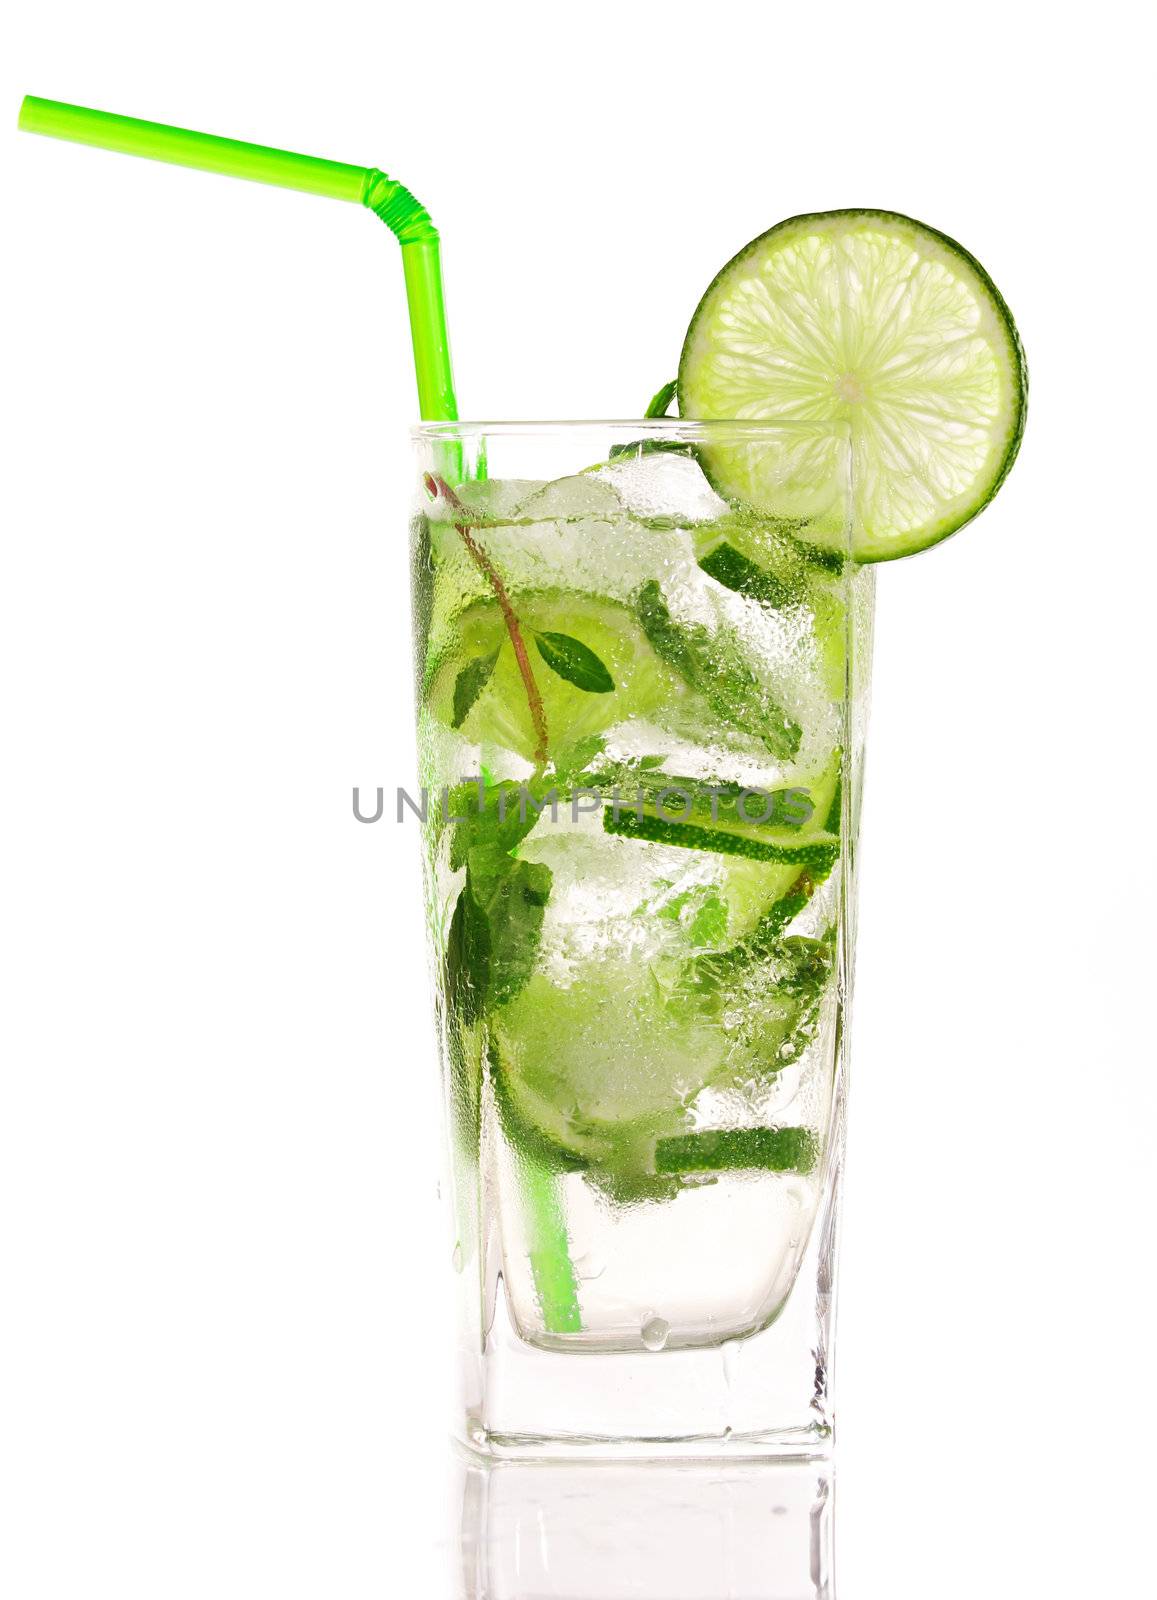 Mojito cocktail by haveseen